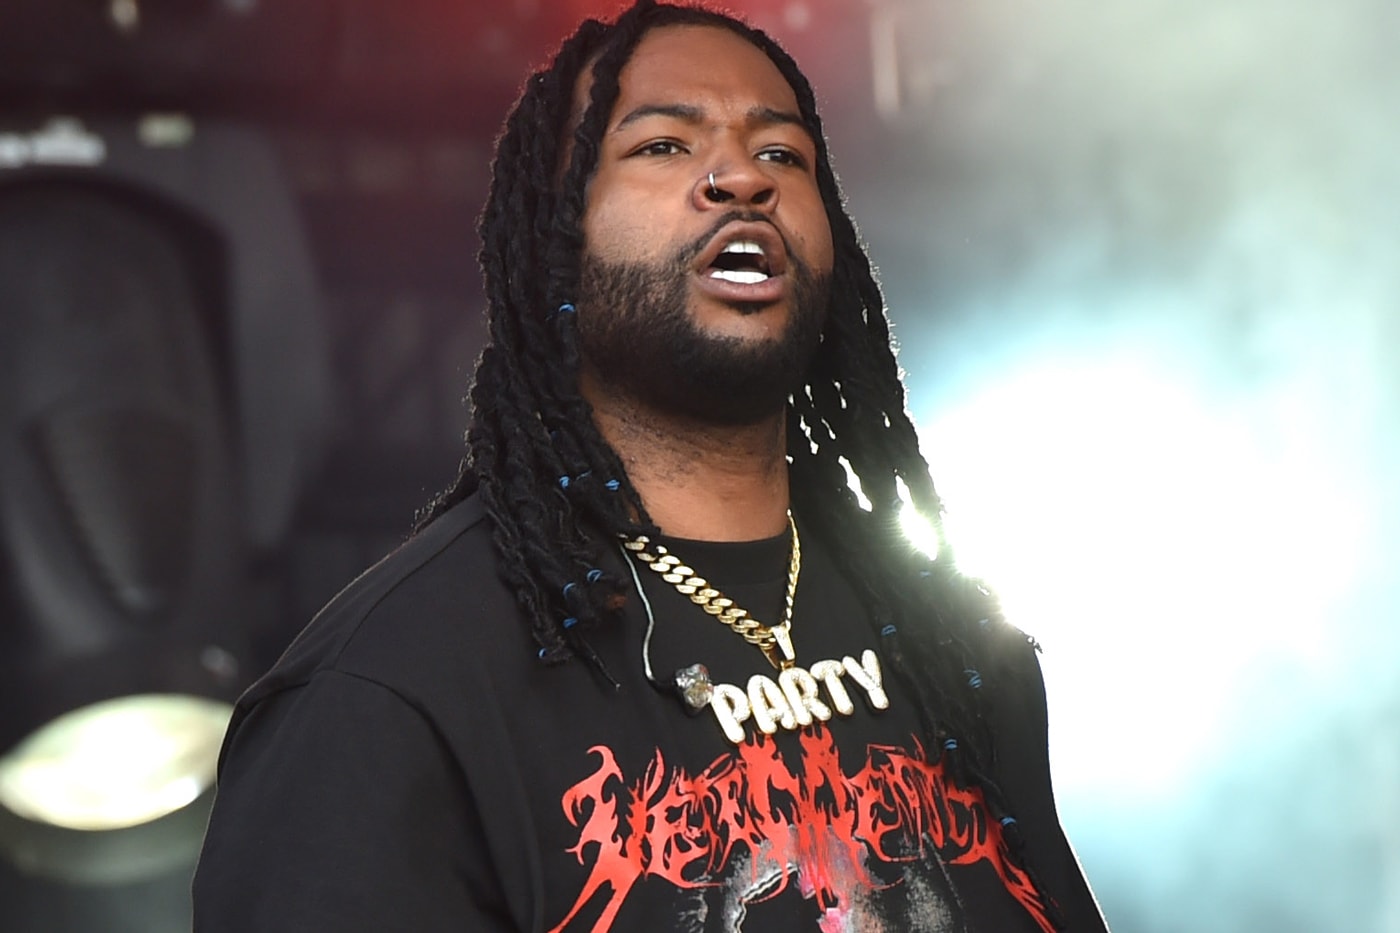 PARTYNEXTDOOR Naked Put it on Silent Two New Songs Tracks